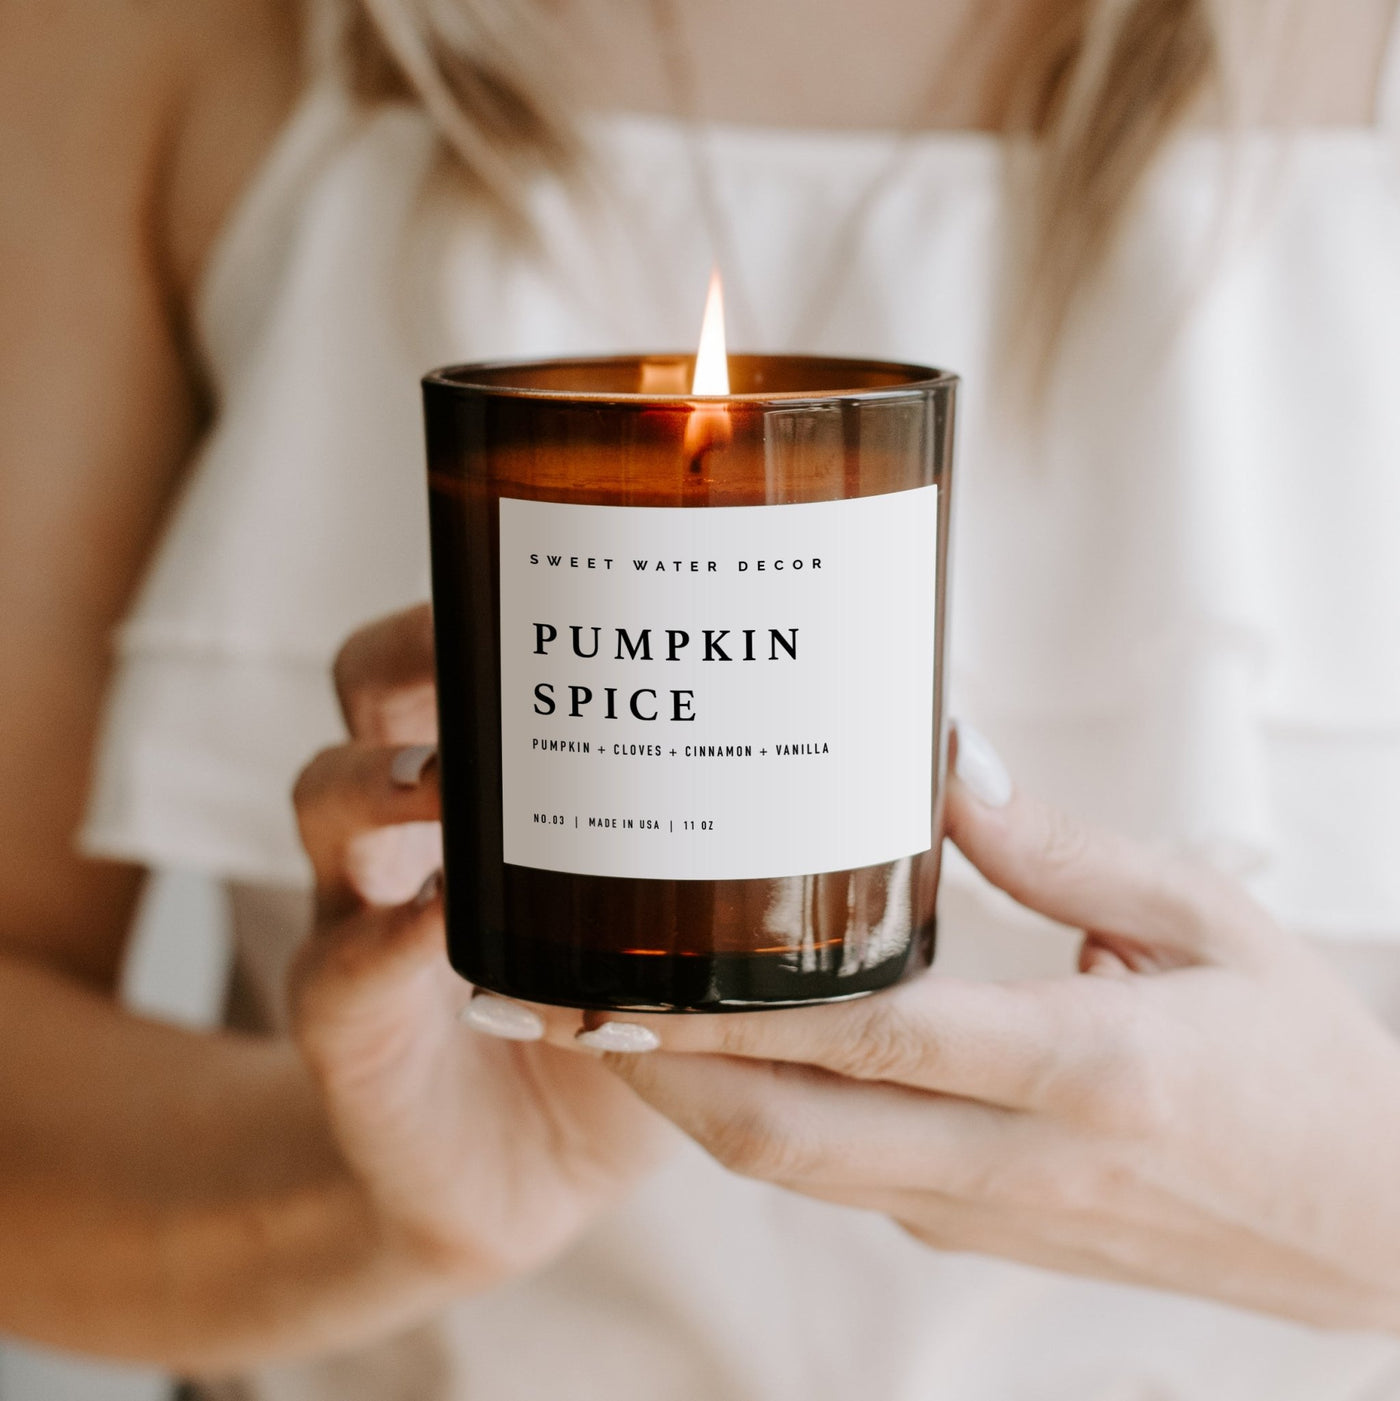 Pumpkin Spice Soy Candle - Amber Jar - 11 oz - Sweet Water Decor - Candles